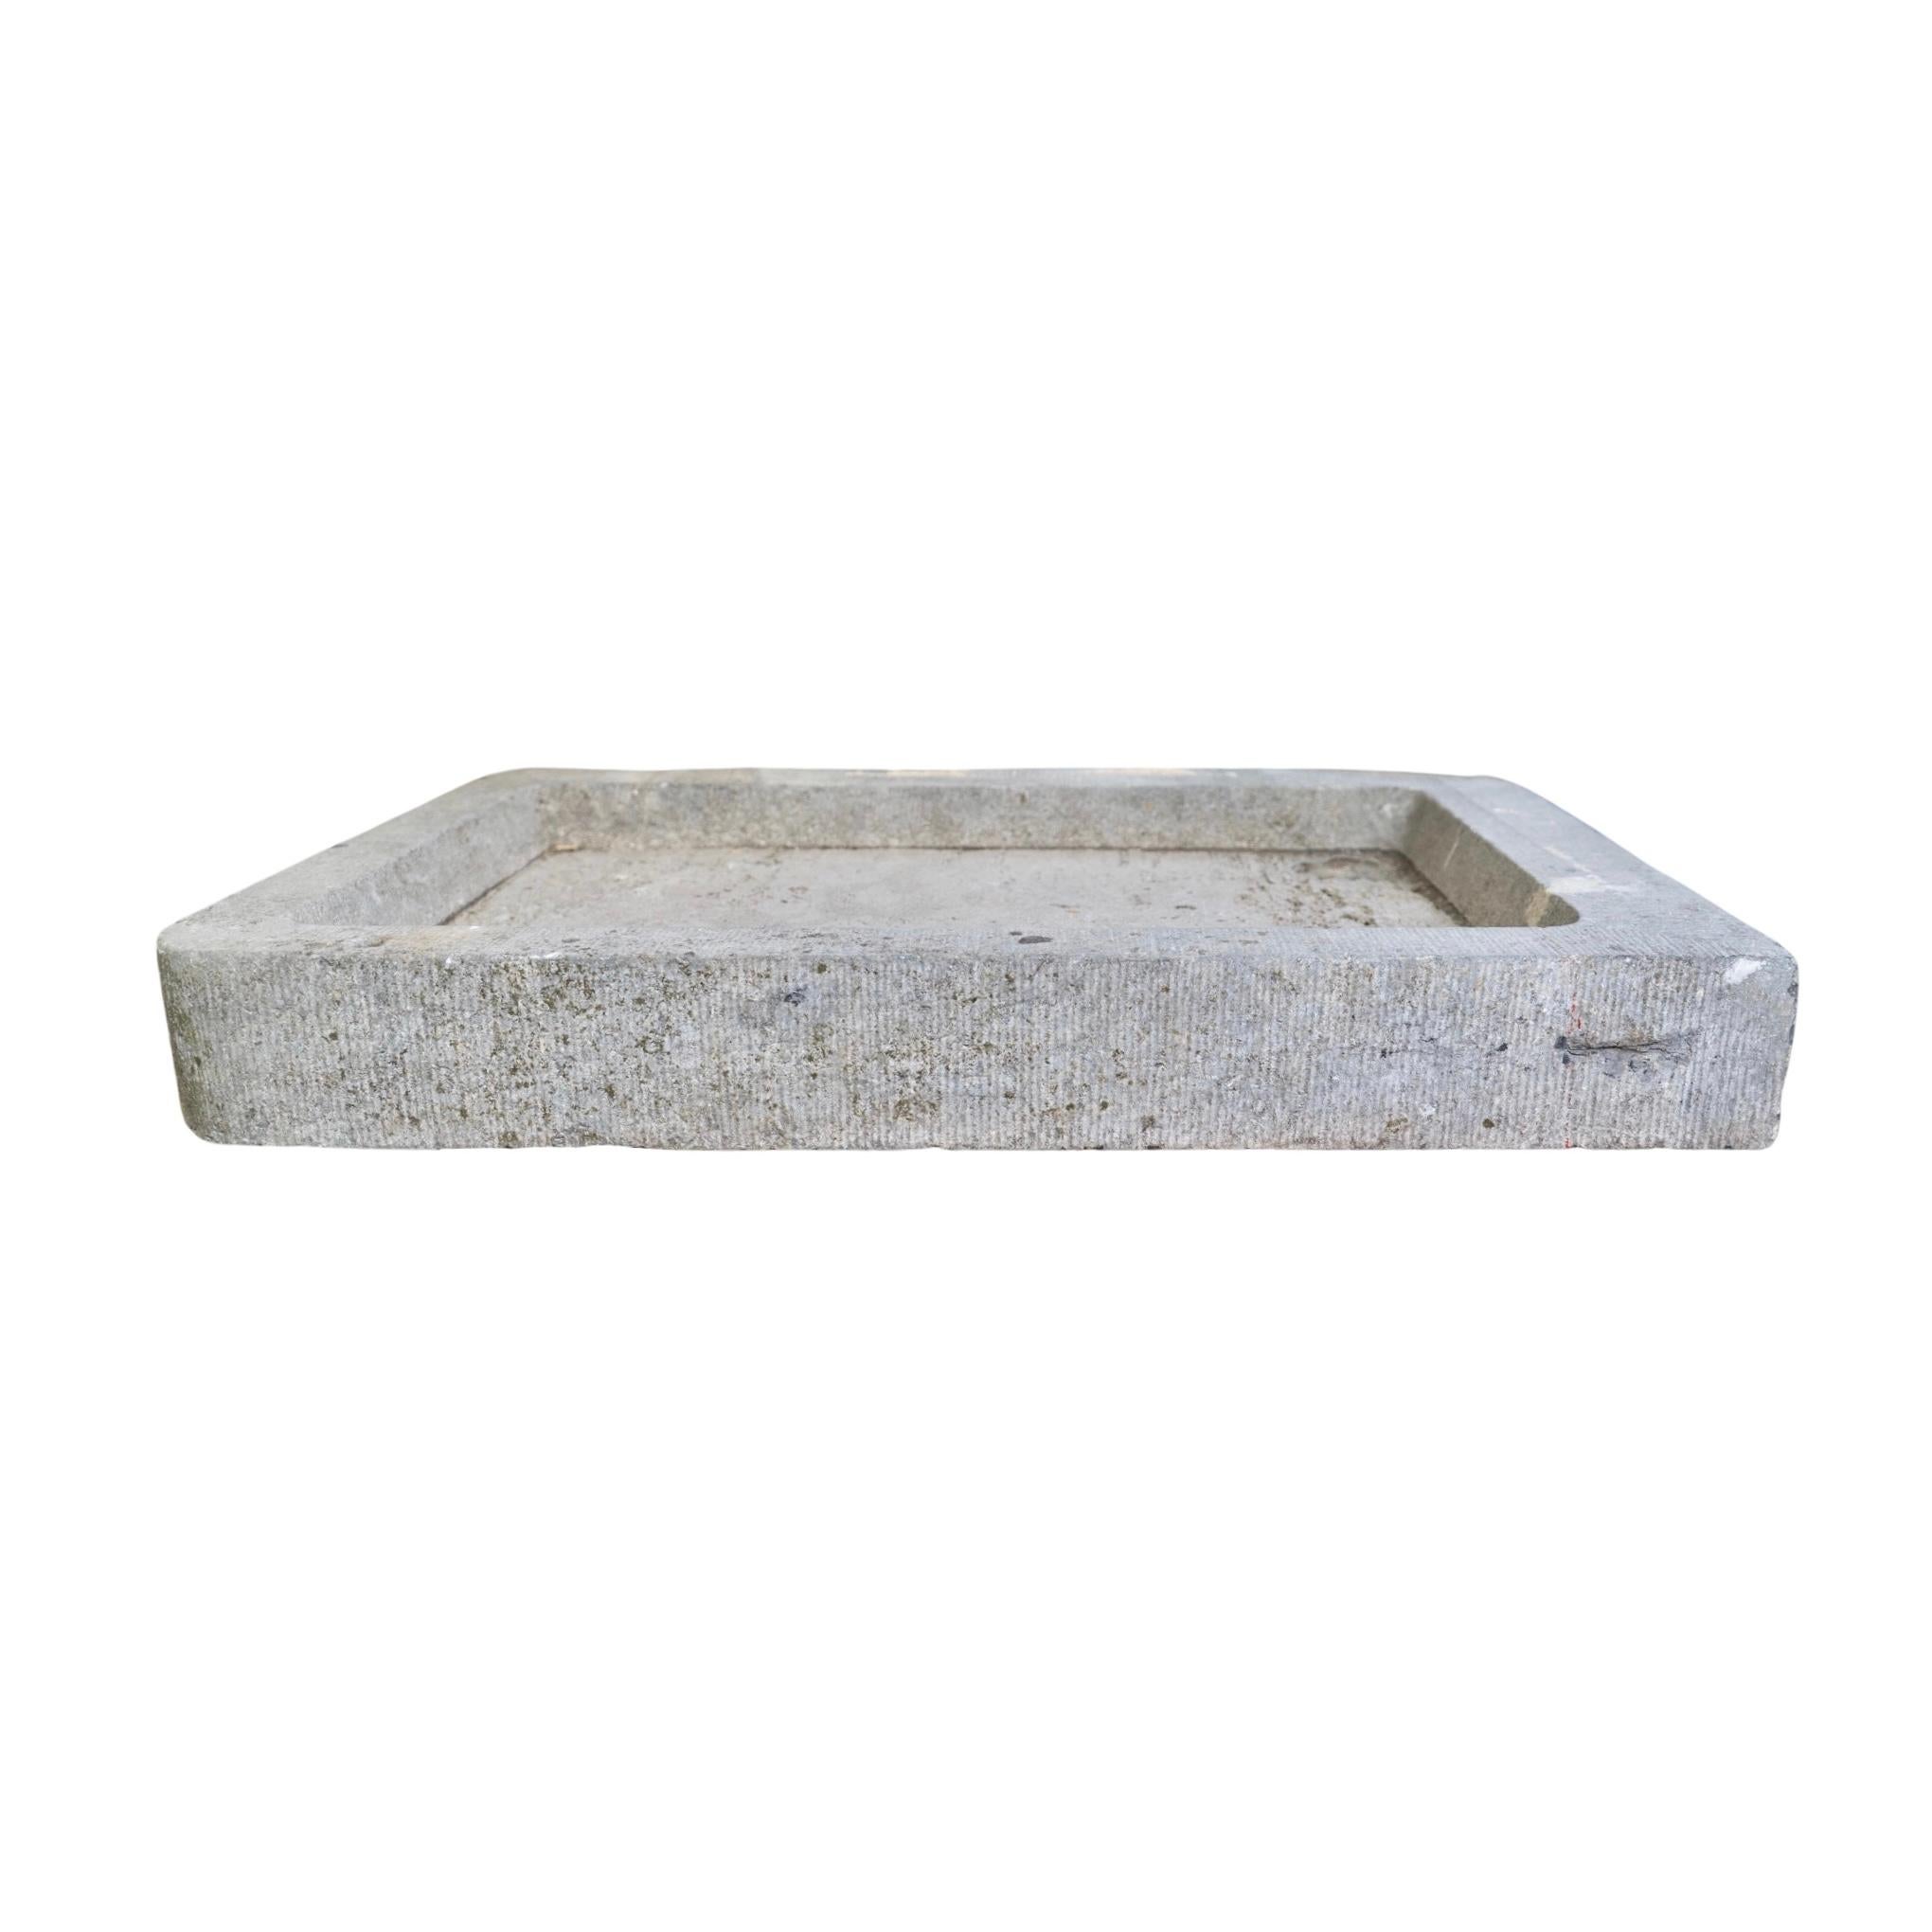 This Belgium bluestone sink is a unique and durable addition to any bathroom; superior to most other materials, it is cut from natural bluestone sourced from Belgium and is carved with a hole for draining. With its strong characteristics, this sink